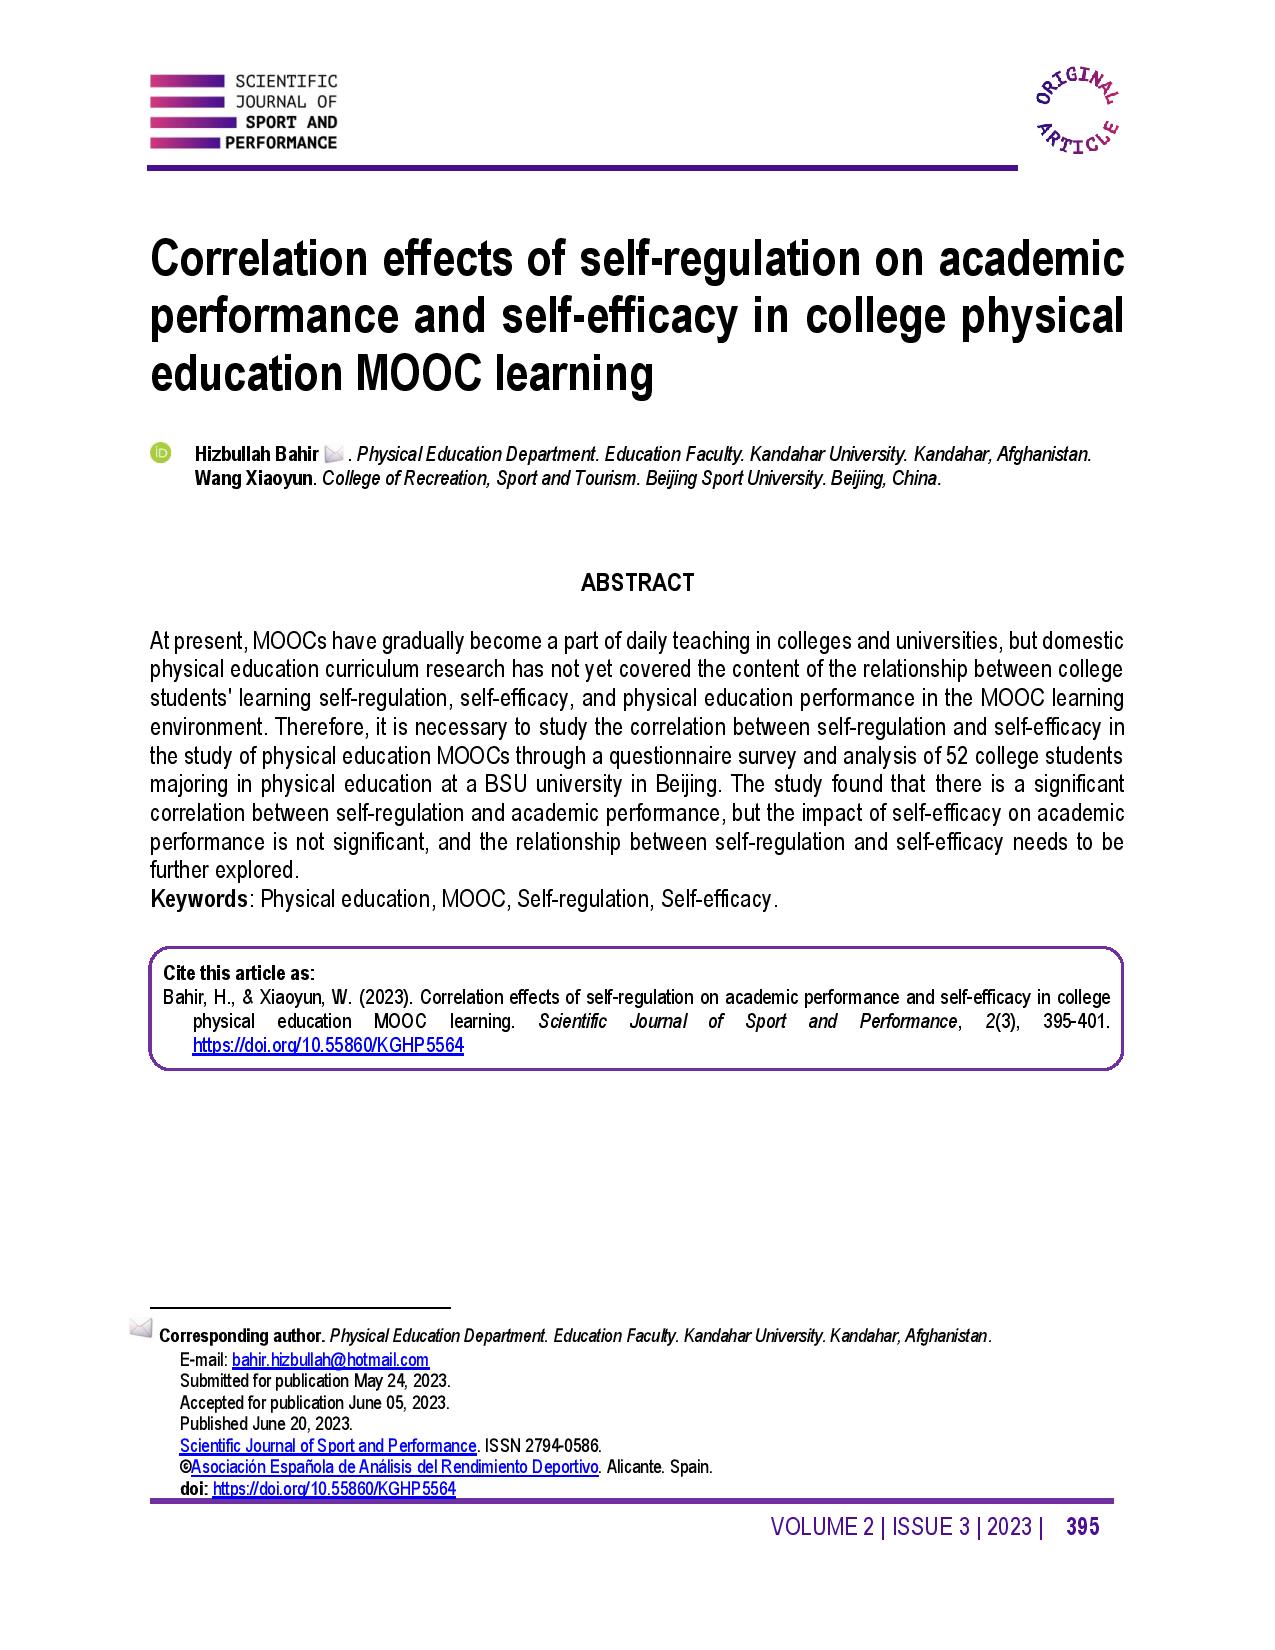 Correlation effects of self-regulation on academic performance and self-efficacy in college physical education MOOC learning